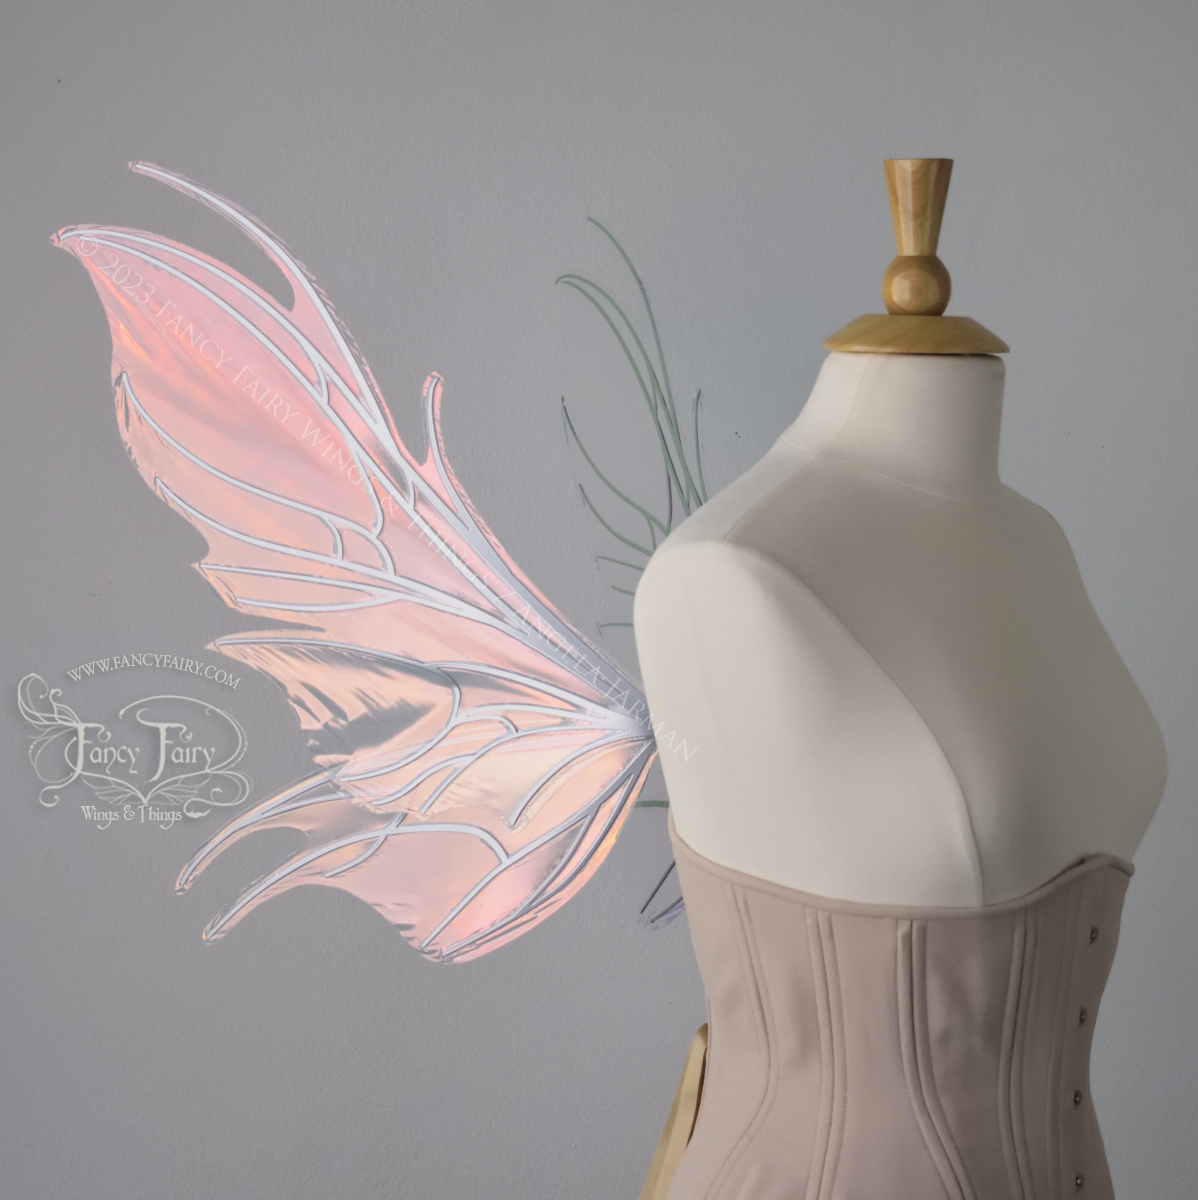 Left side view of a dress form wearing an underbust corset & pink iridescent fairy wings with a spikey shape, with silver veins